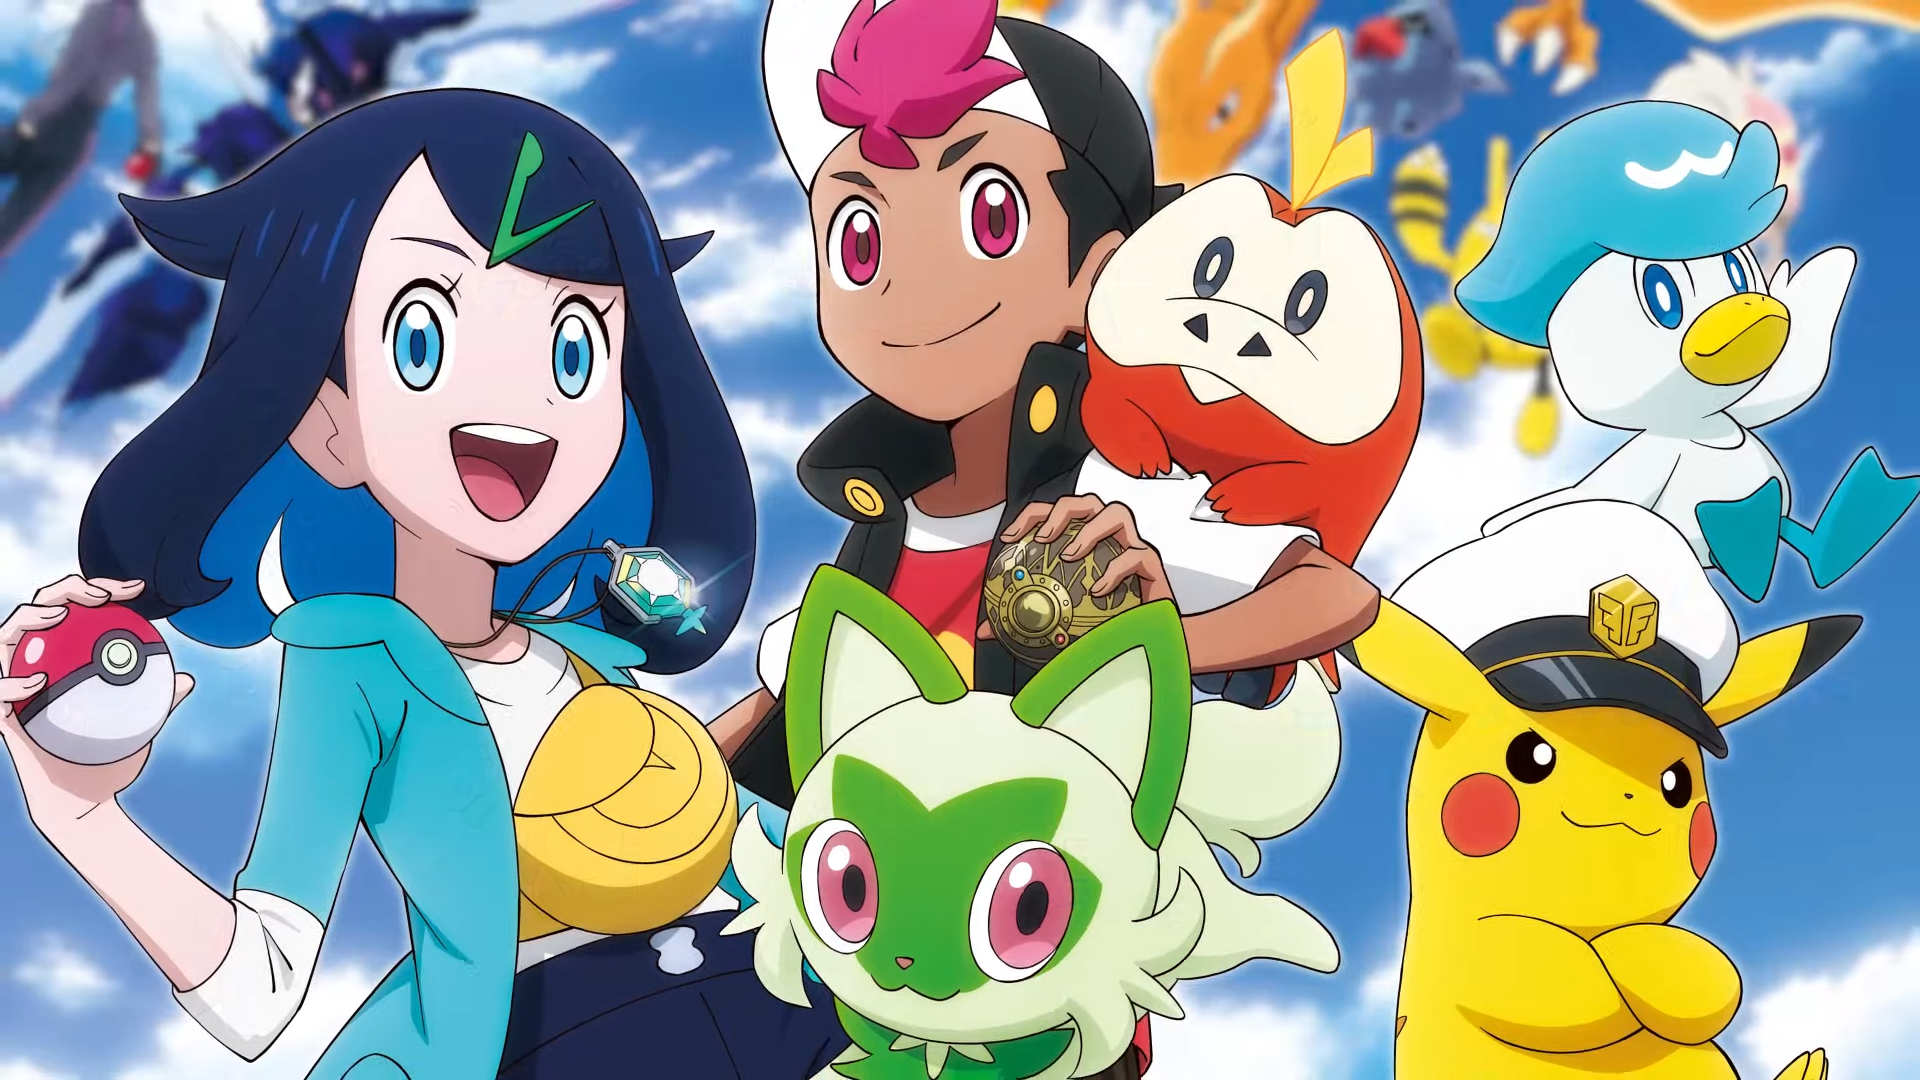 Image for First trailer for next Pokémon anime series releases